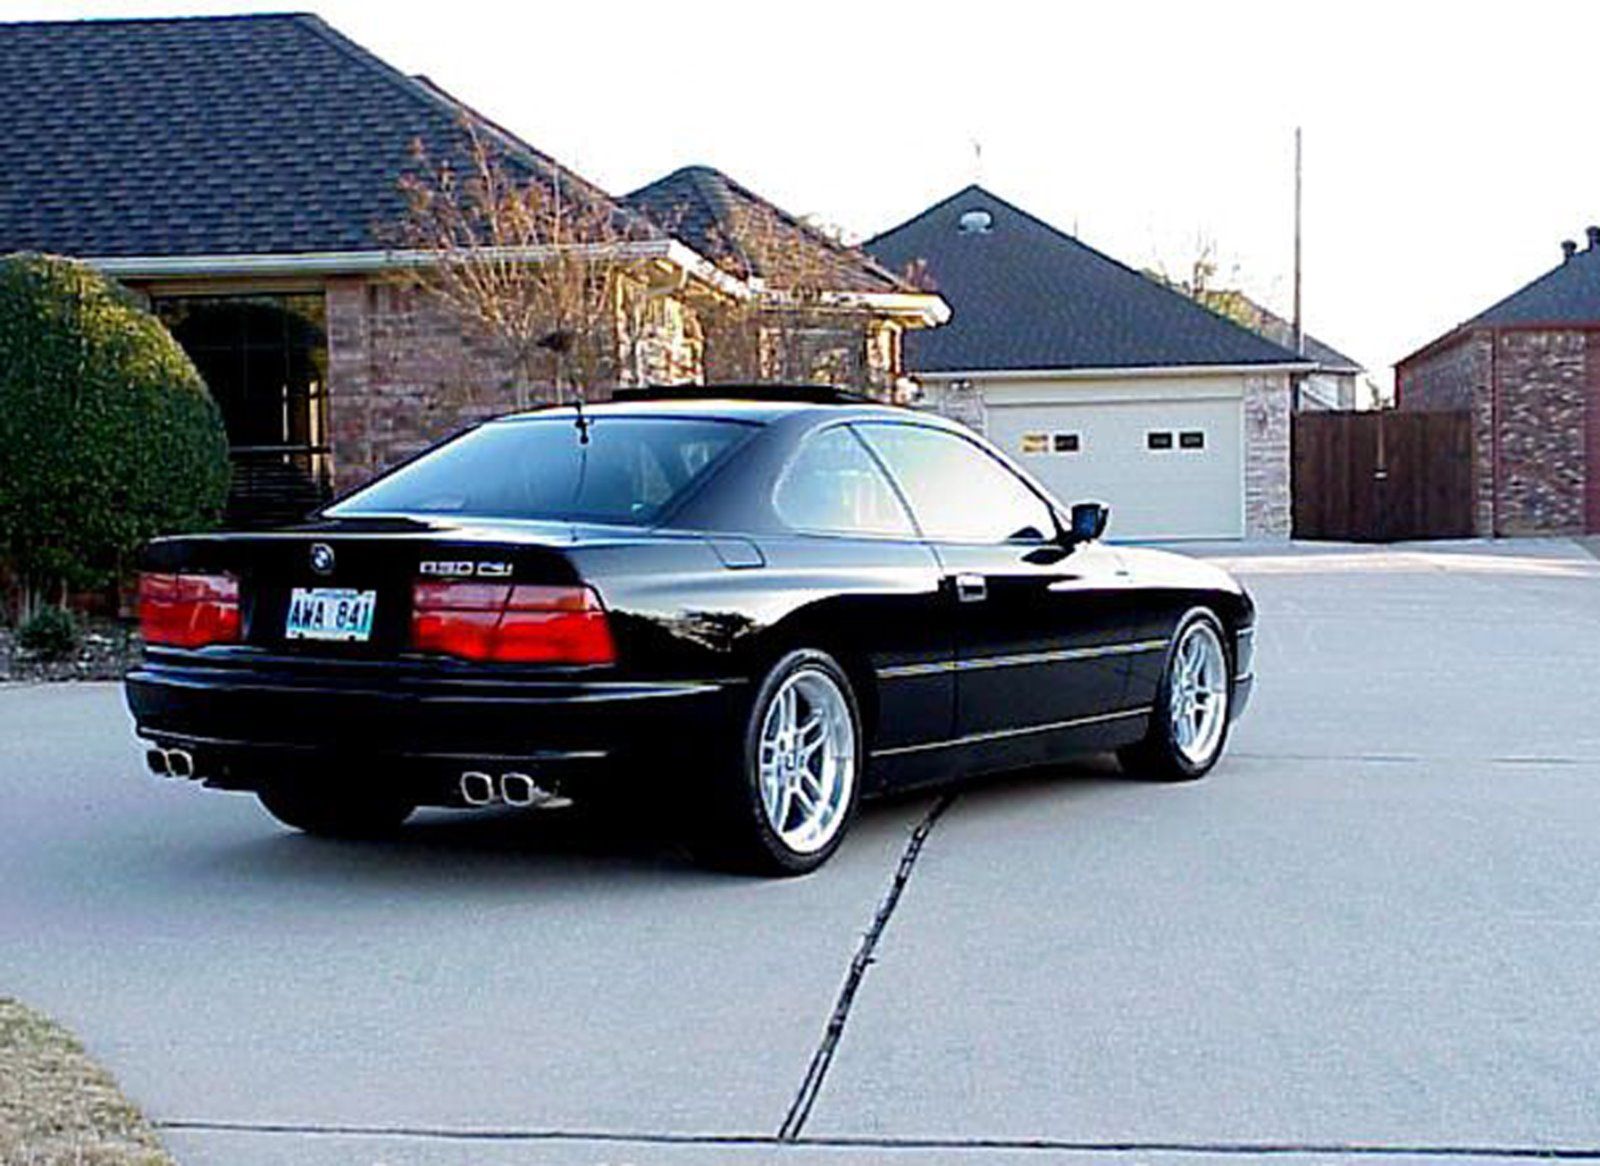 1997 BMW 8 Series - Pictures - CarGurus | Bmw classic cars, Bmw, Bmw classic